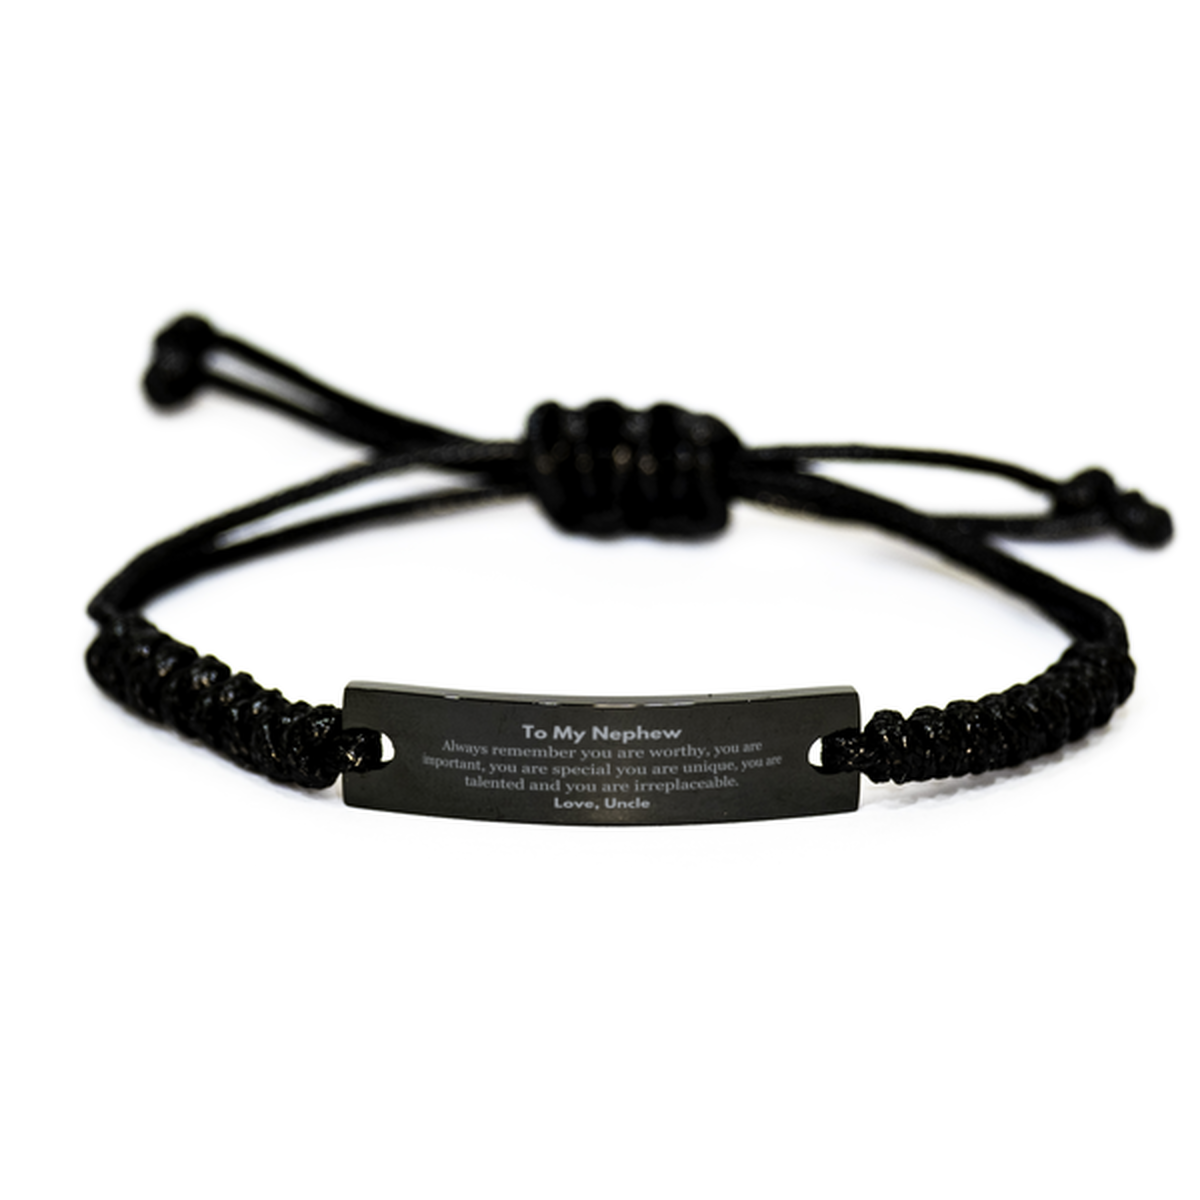 Nephew Birthday Gifts from Uncle, Inspirational Black Rope Bracelet for Nephew Christmas Graduation Gifts for Nephew Always remember you are worthy, you are important. Love, Uncle